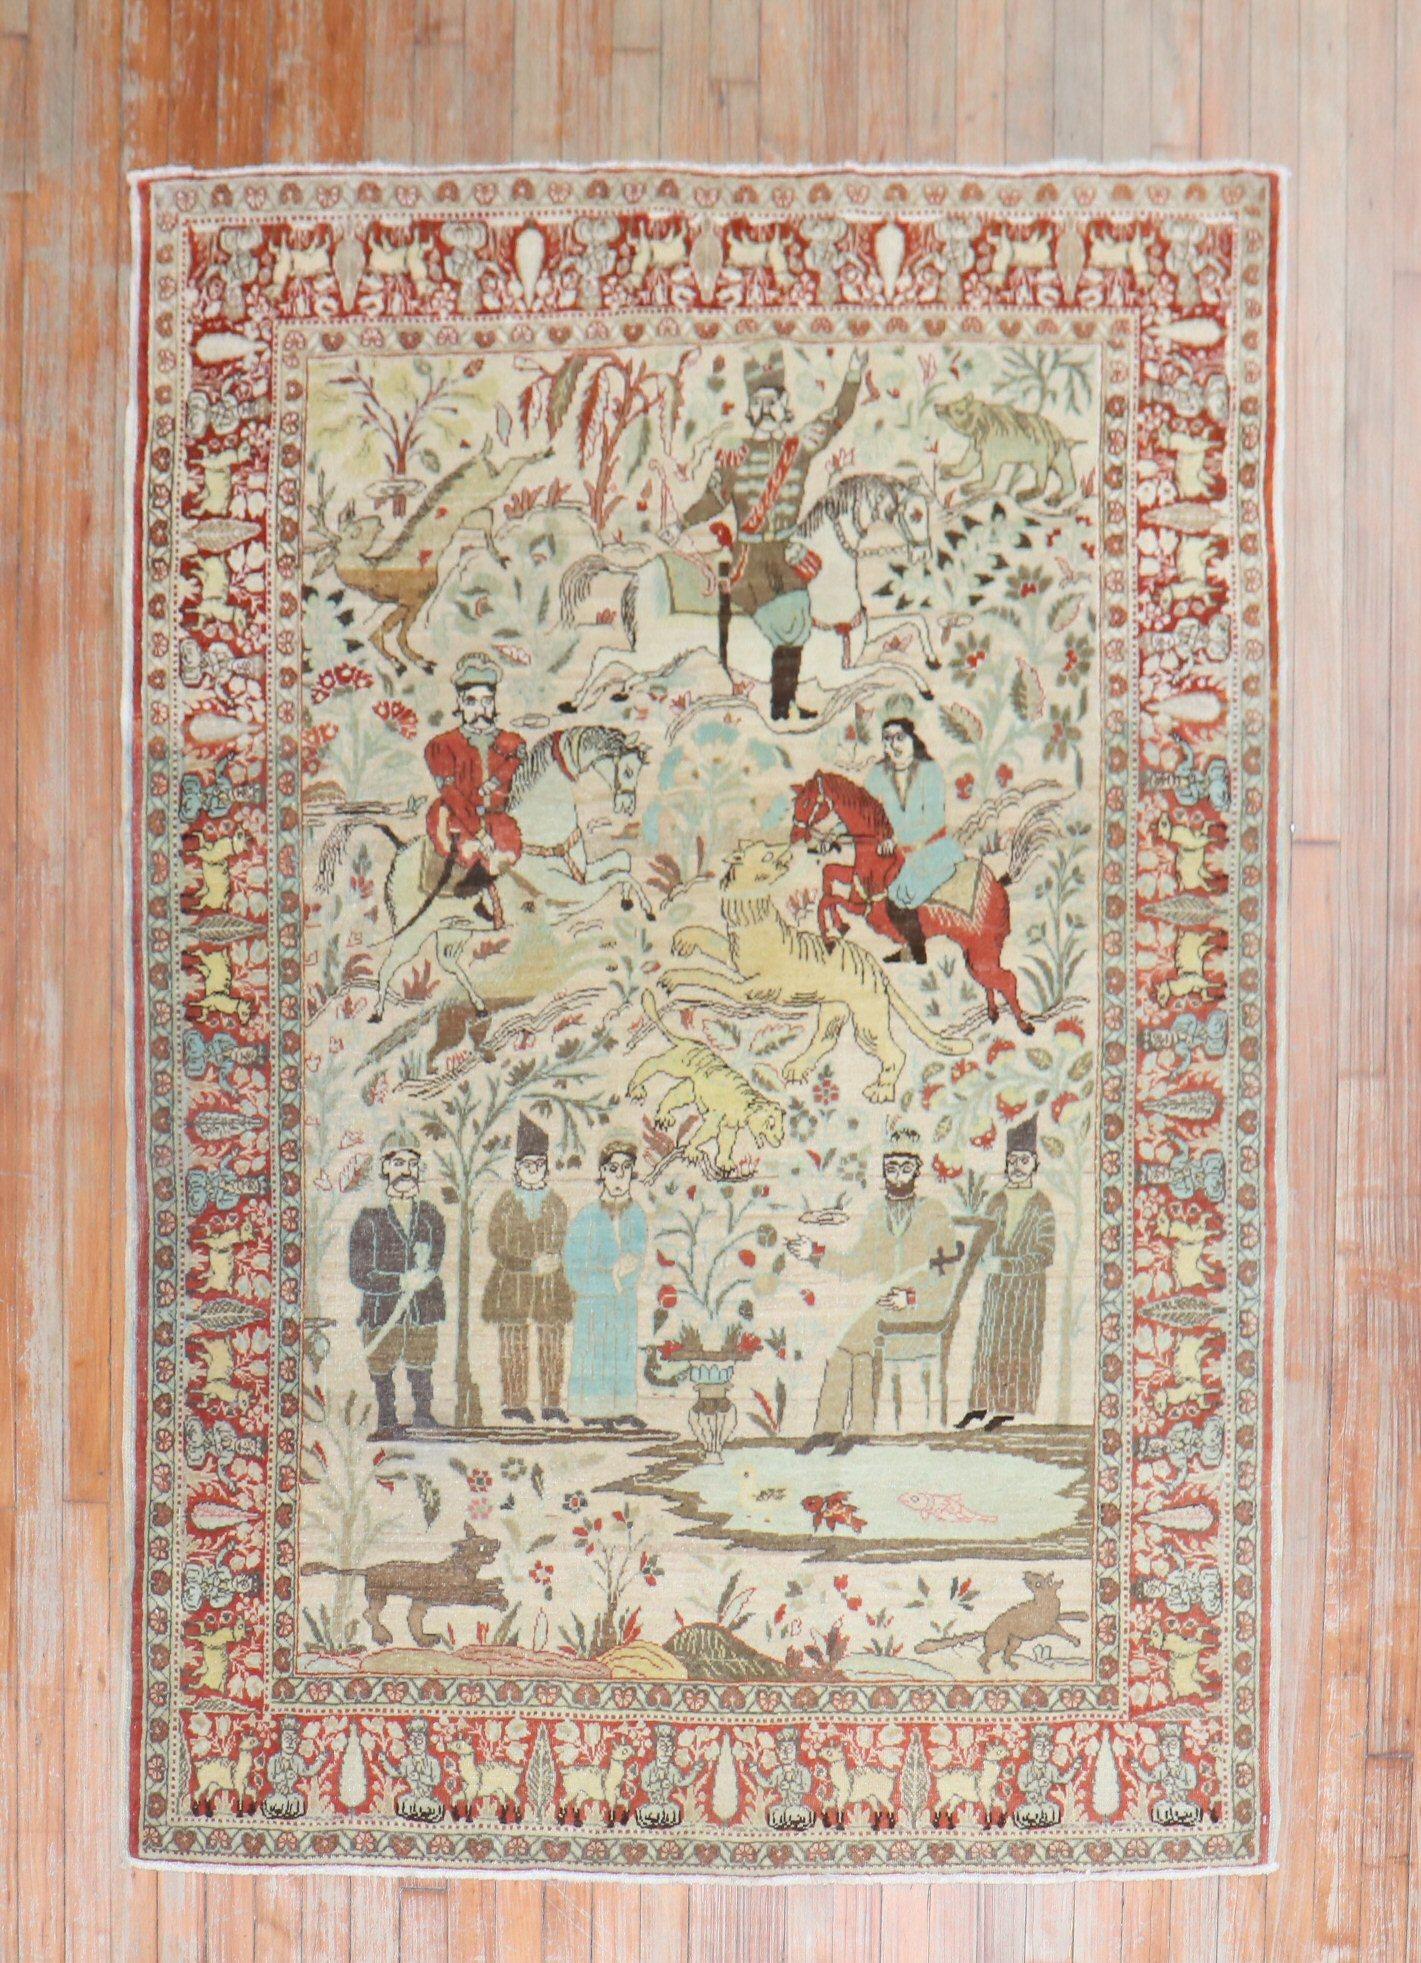 Scatter size antique Persian Tabriz rug with a Pictorial Animal Hunting Pattern from the 1st quarter of the 20th Century

Measures: 4'6'' x 6'.